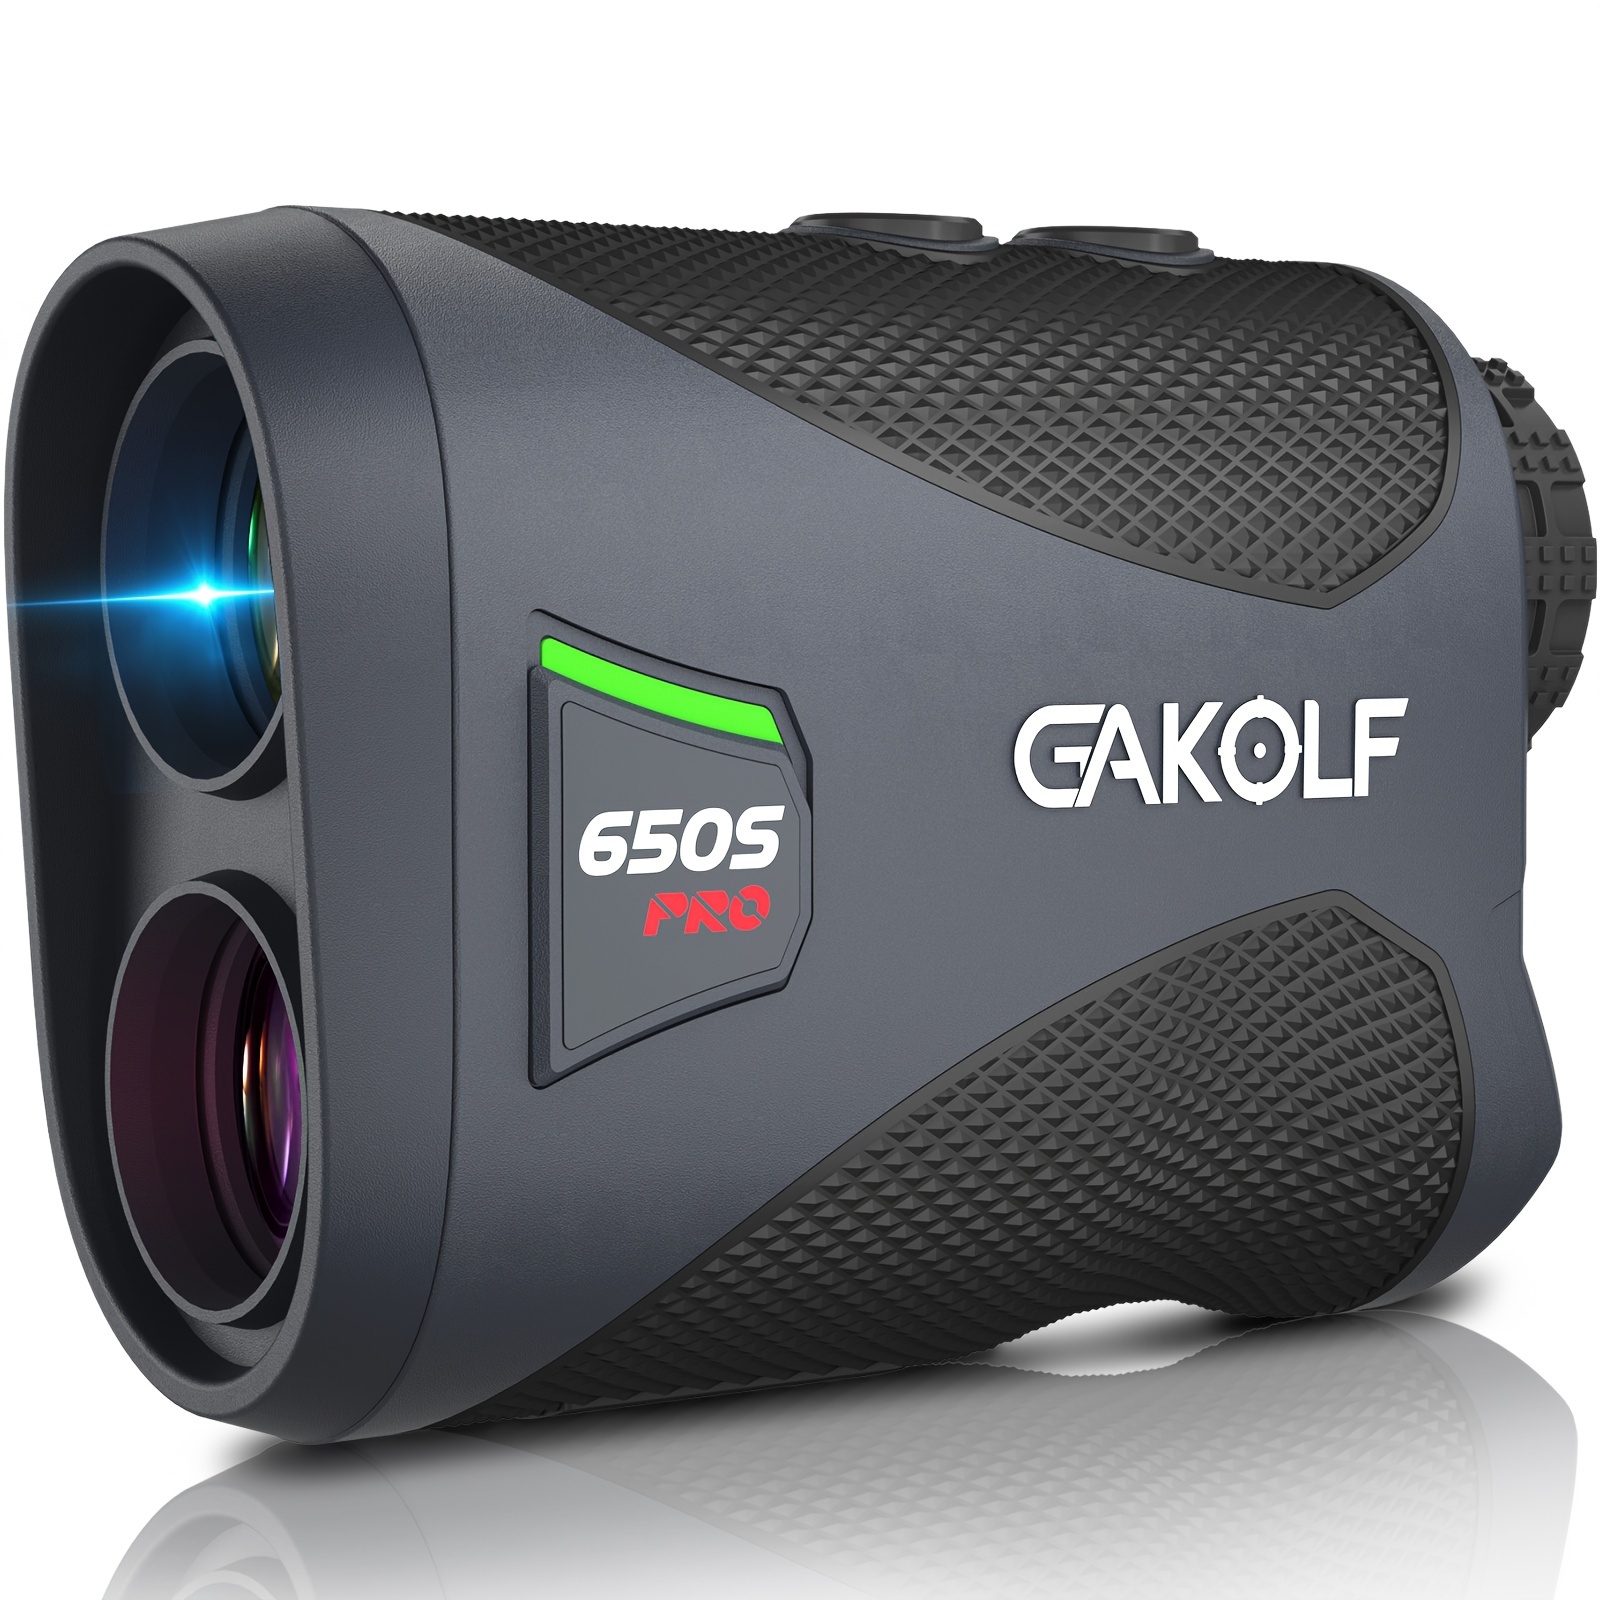 

Laser Golf Rangefinder With Slope Switch And Fast Acquisition, 650 Yard Range Finder With Flag Lock Vibration And Magnetic For Golfers